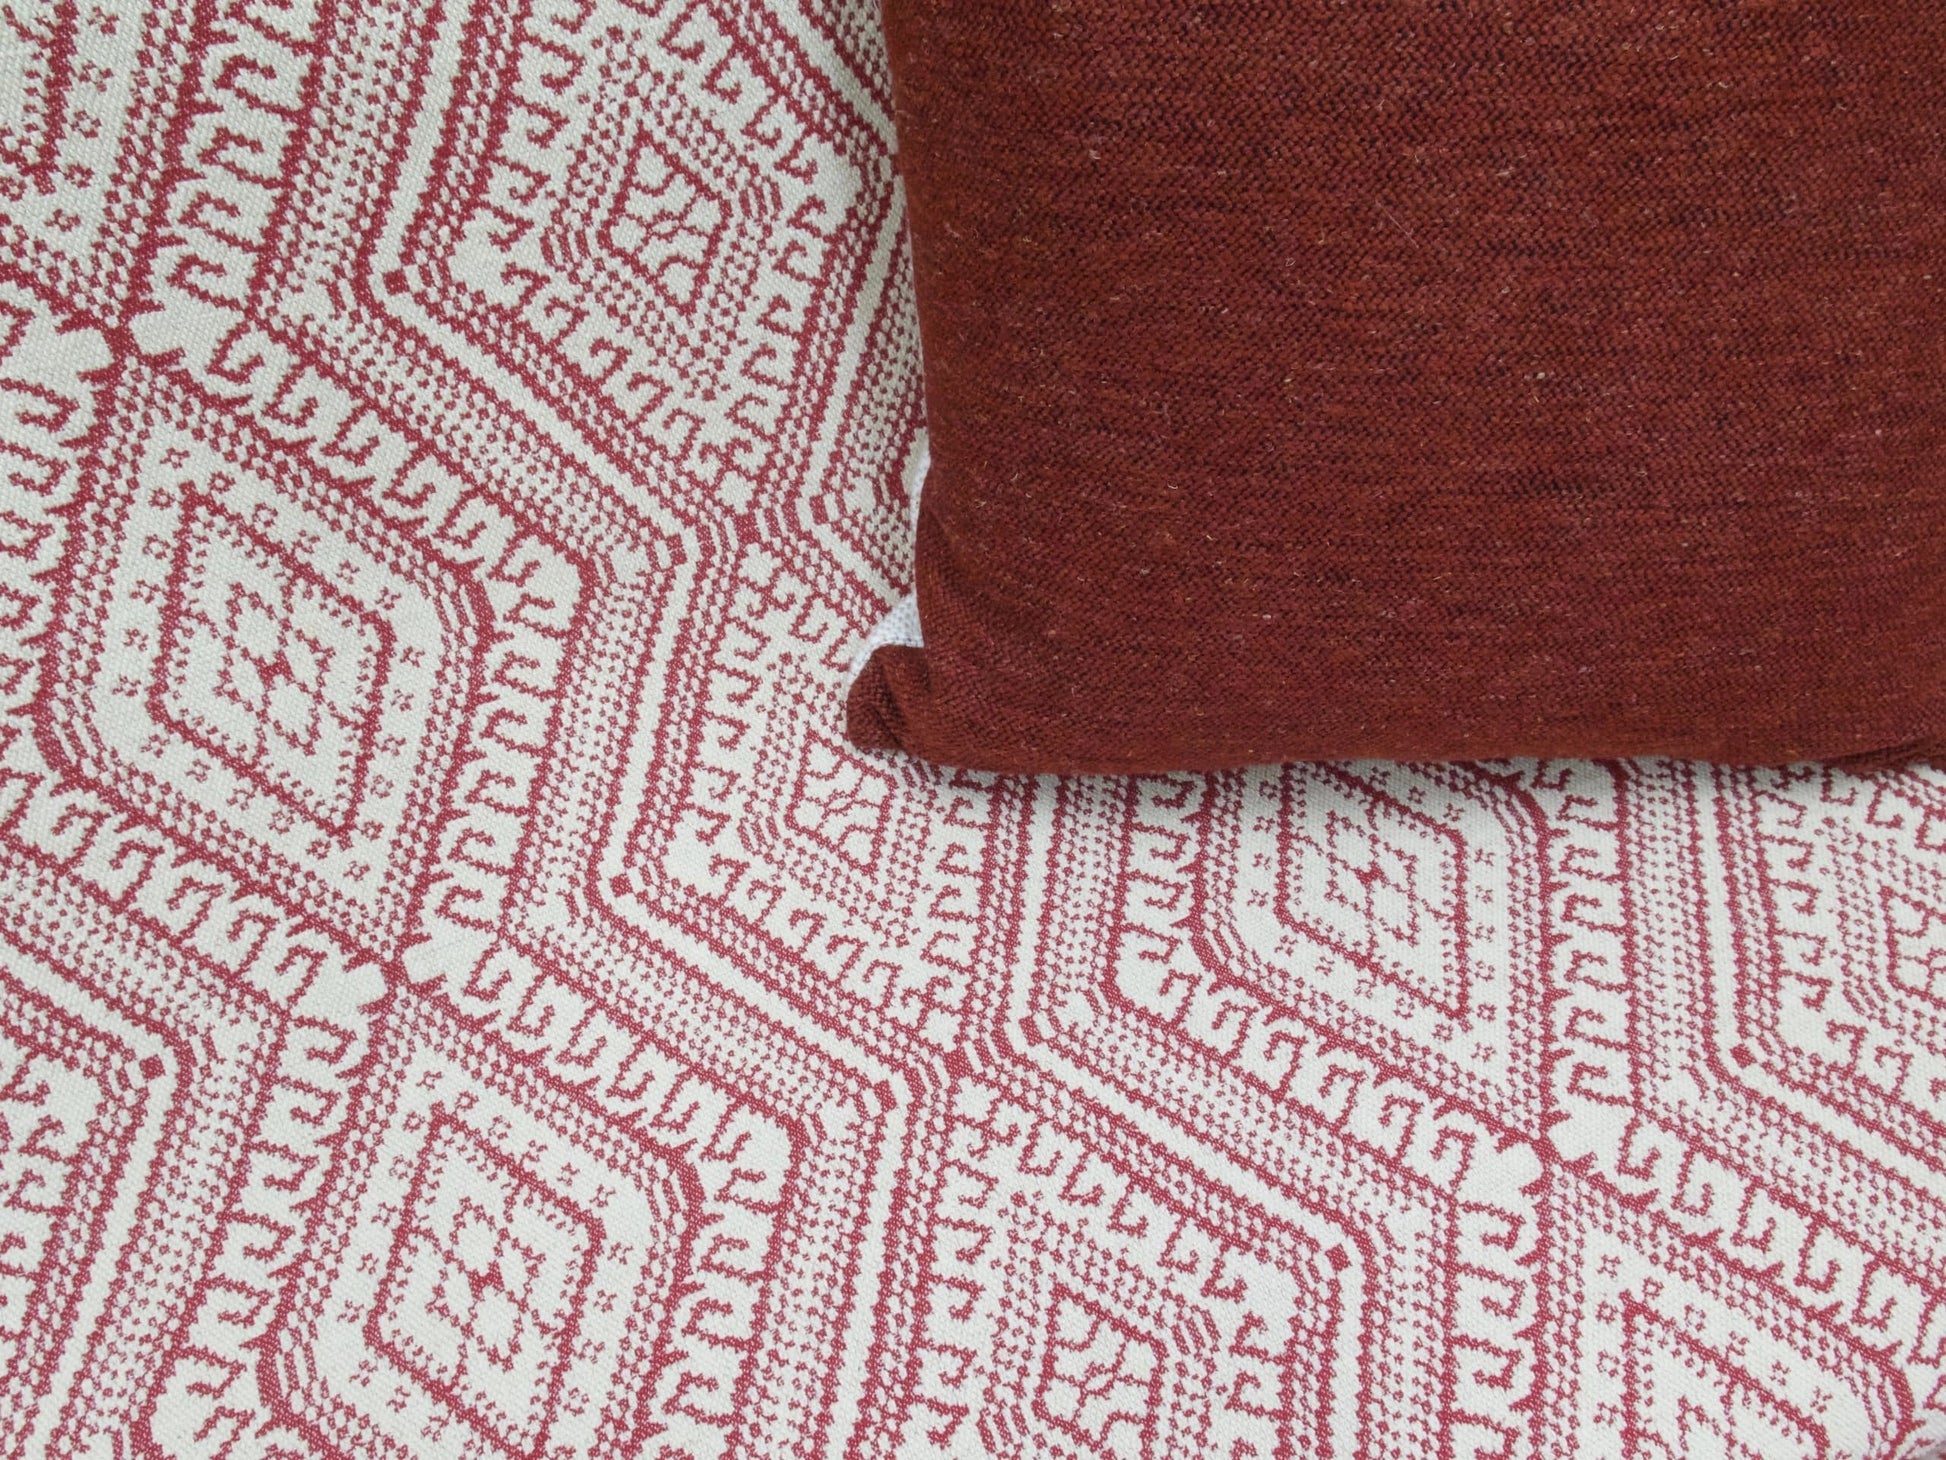 Brick Red Cotton Ethnic Upholstery Fabric|Antique Farmhouse Fabric For Chair,Sofa,Couch|Easter Diamond Pattern Upholstery Fabric